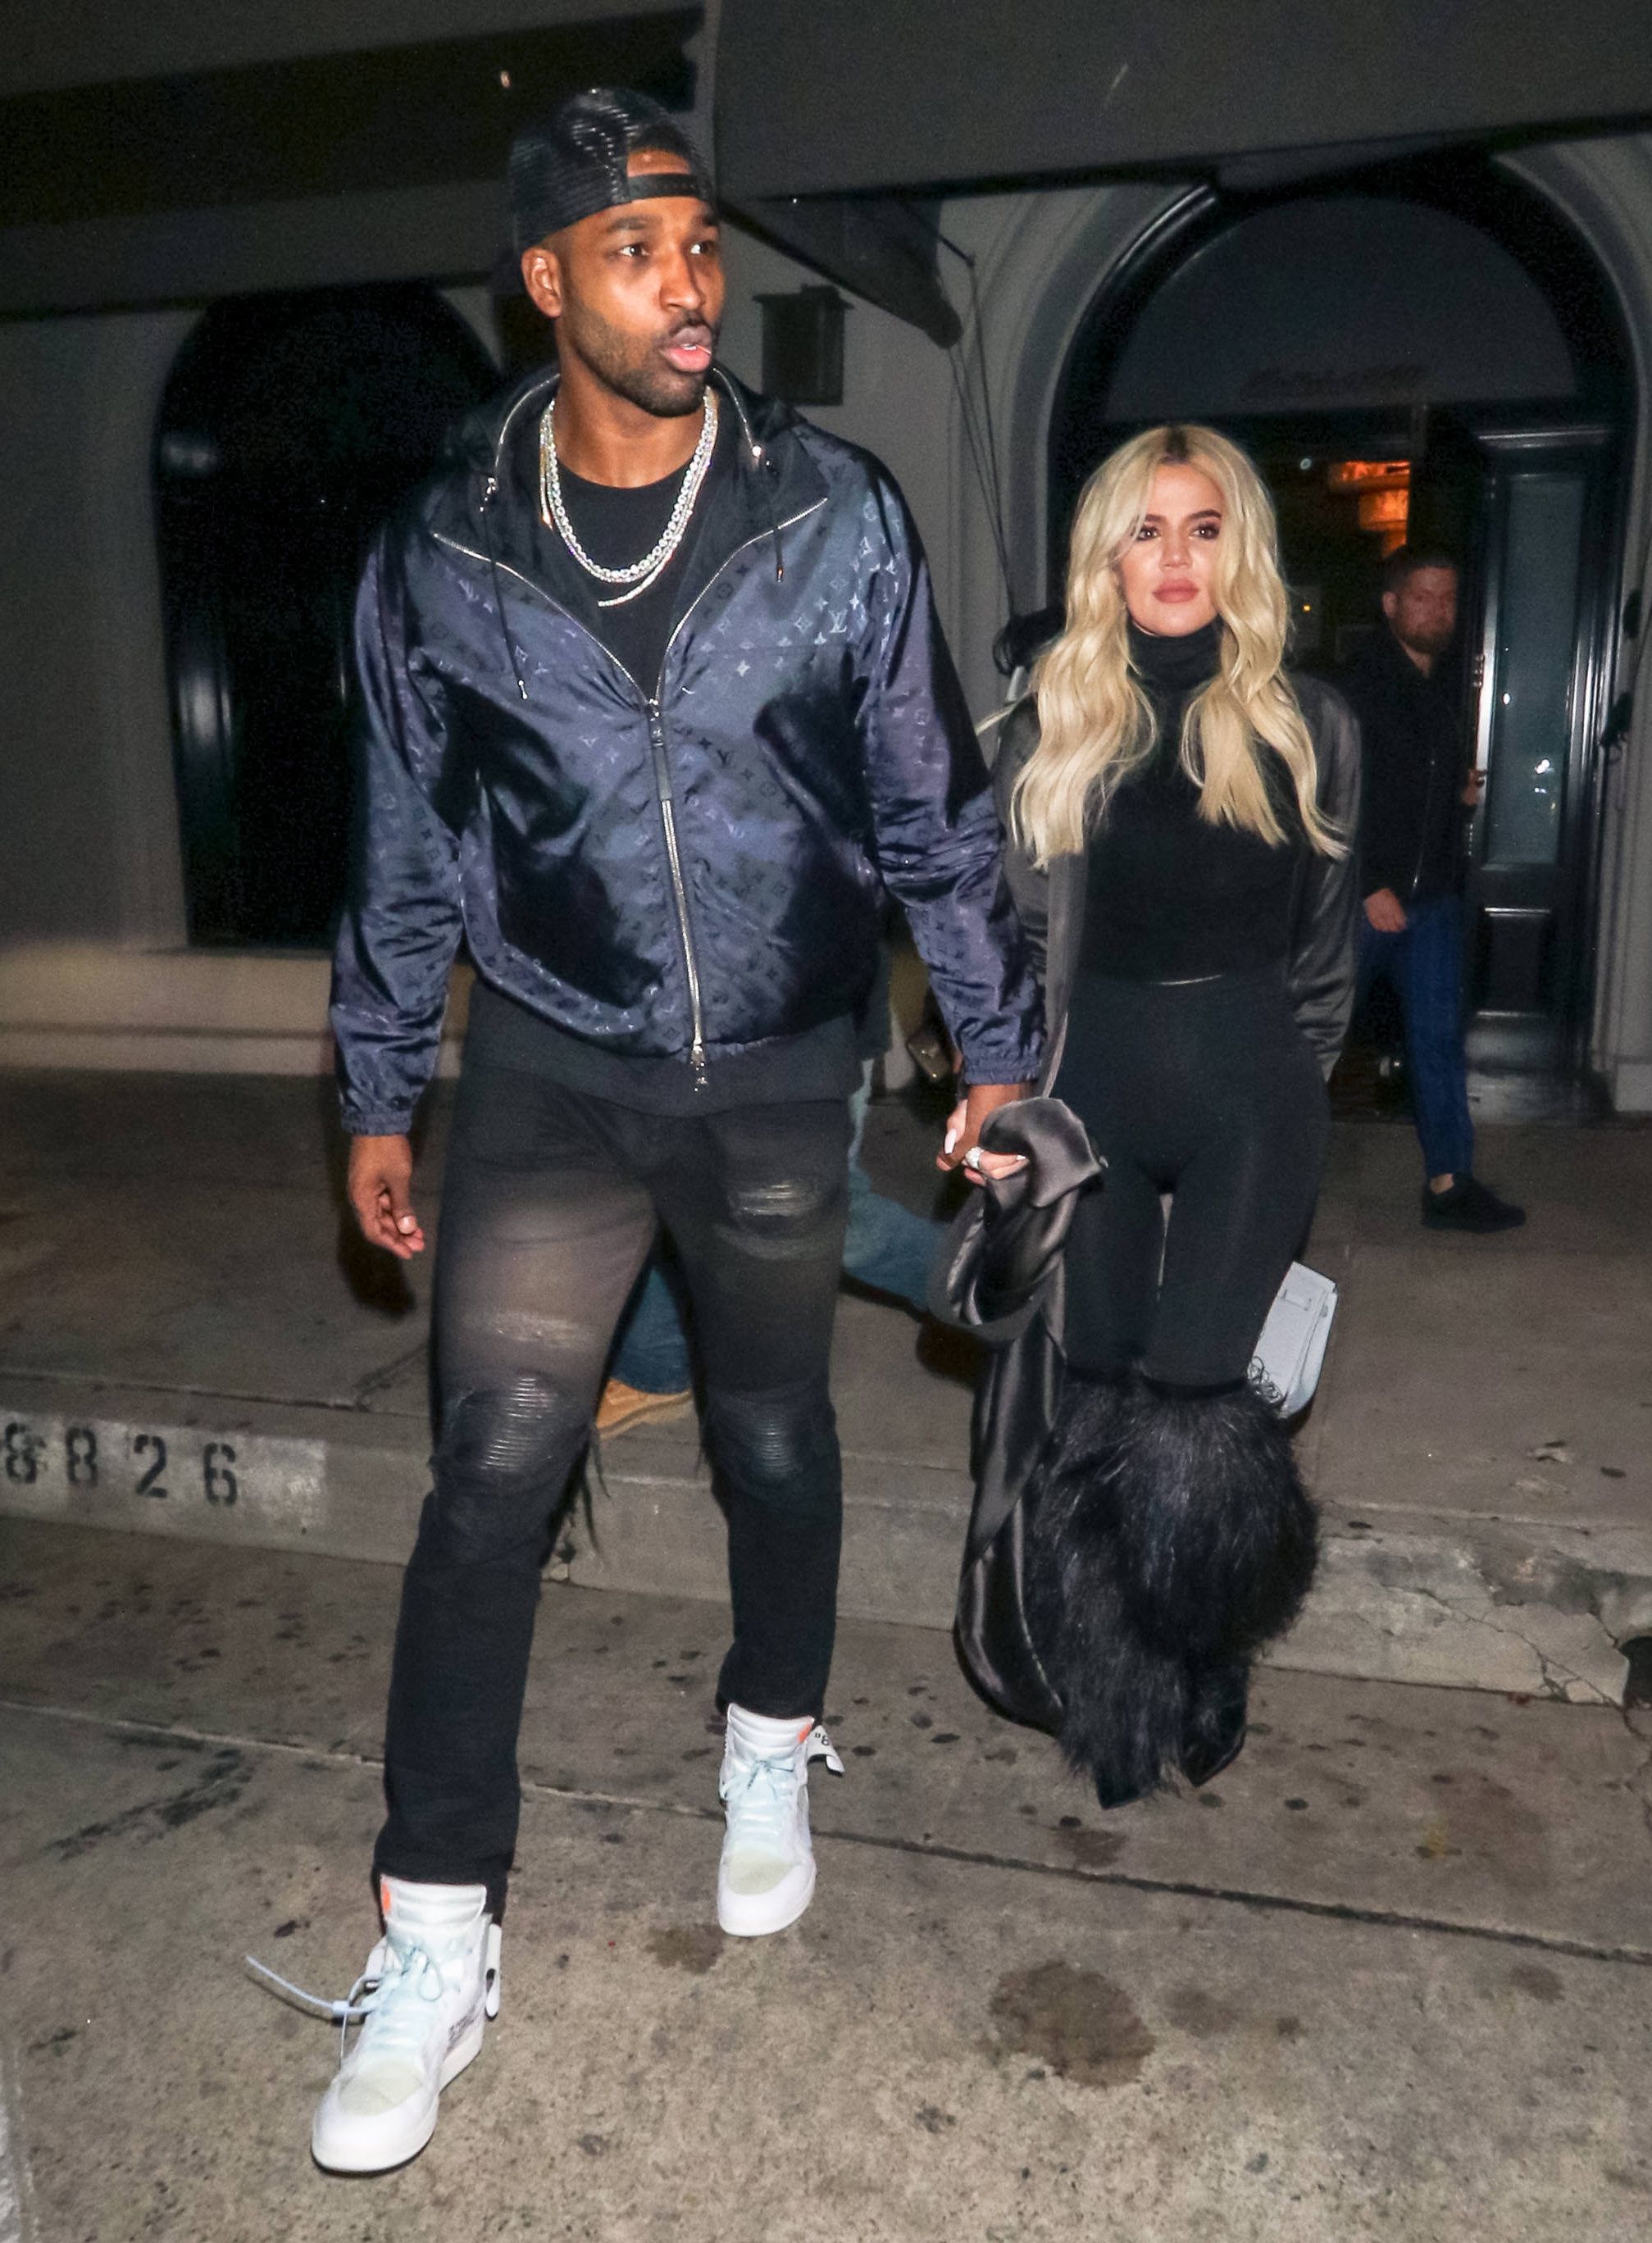 <p><a href="https://www.wonderwall.com/celebrity/profiles/overview/khloe-kardashian-622.article">Khloe Kardashian</a>'s relationship with NBA player Tristan Thompson started in 2016 after a mutual friend set them up. "I was put on a blind date with Tristan. That's how I met Tristan," Khloe said on September 2017's "Keeping Up With the Kardashians Ten Year Anniversary Special." "Brandon Jennings, who is a basketball player, he is a friend of mine and Malika [Haqq]'s... was like, 'You're such a good girl, I want to introduce you to someone.'" Brandon then brought Tristan along to a group dinner. "I was at the Bel-Air Hotel. He came to the dinner. I didn't want to go on a blind date," Khloe added. "So Brandon kind of ambushed the blind date. So I had a bunch of people, and he brought him and we just connected." Things got serious fast: About a year after they were first publicly linked, the world learned that Khloe was <a href="http://www.wonderwall.com/news/another-one-khloe-kardashian-reportedly-pregnant-3010054.article">pregnant</a>. She gave birth to <a href="https://www.wonderwall.com/news/true-thompson-makes-social-media-splash-3014230.article">their daughter, True</a>, in April 2018 just two days after photos and videos surfaced revealing Tristan <a href="https://www.wonderwall.com/celebrity/couples/notorious-cheating-scandals-16530.gallery">had been unfaithful</a> to her during her pregnancy. But rather than leave him, Khloe controversially chose to <a href="https://www.wonderwall.com/news/why-khloe-kardashians-family-wont-pressure-her-leave-cheating-tristan-thompson-3014149.article">give him another chance</a>.... until he <a href="https://www.wonderwall.com/celebrity/photos/icymi-biggest-celebrity-news-stories-february-2019-3018546.gallery">stepped out on her again</a>, this time with <a href="https://www.wonderwall.com/celebrity/profiles/overview/kylie-jenner-1413.article">Kylie Jenner</a>'s BFF, model Jordyn Woods, in February 2019, which led Khloe to <a href="https://www.wonderwall.com/news/khloe-kardashian-and-tristan-thompson-split-after-alleged-infidelity-again-3018509.article">dump him</a>, though they quietly reconciled the following year... only to split again in 2021 in the wake of more cheating claims.</p>